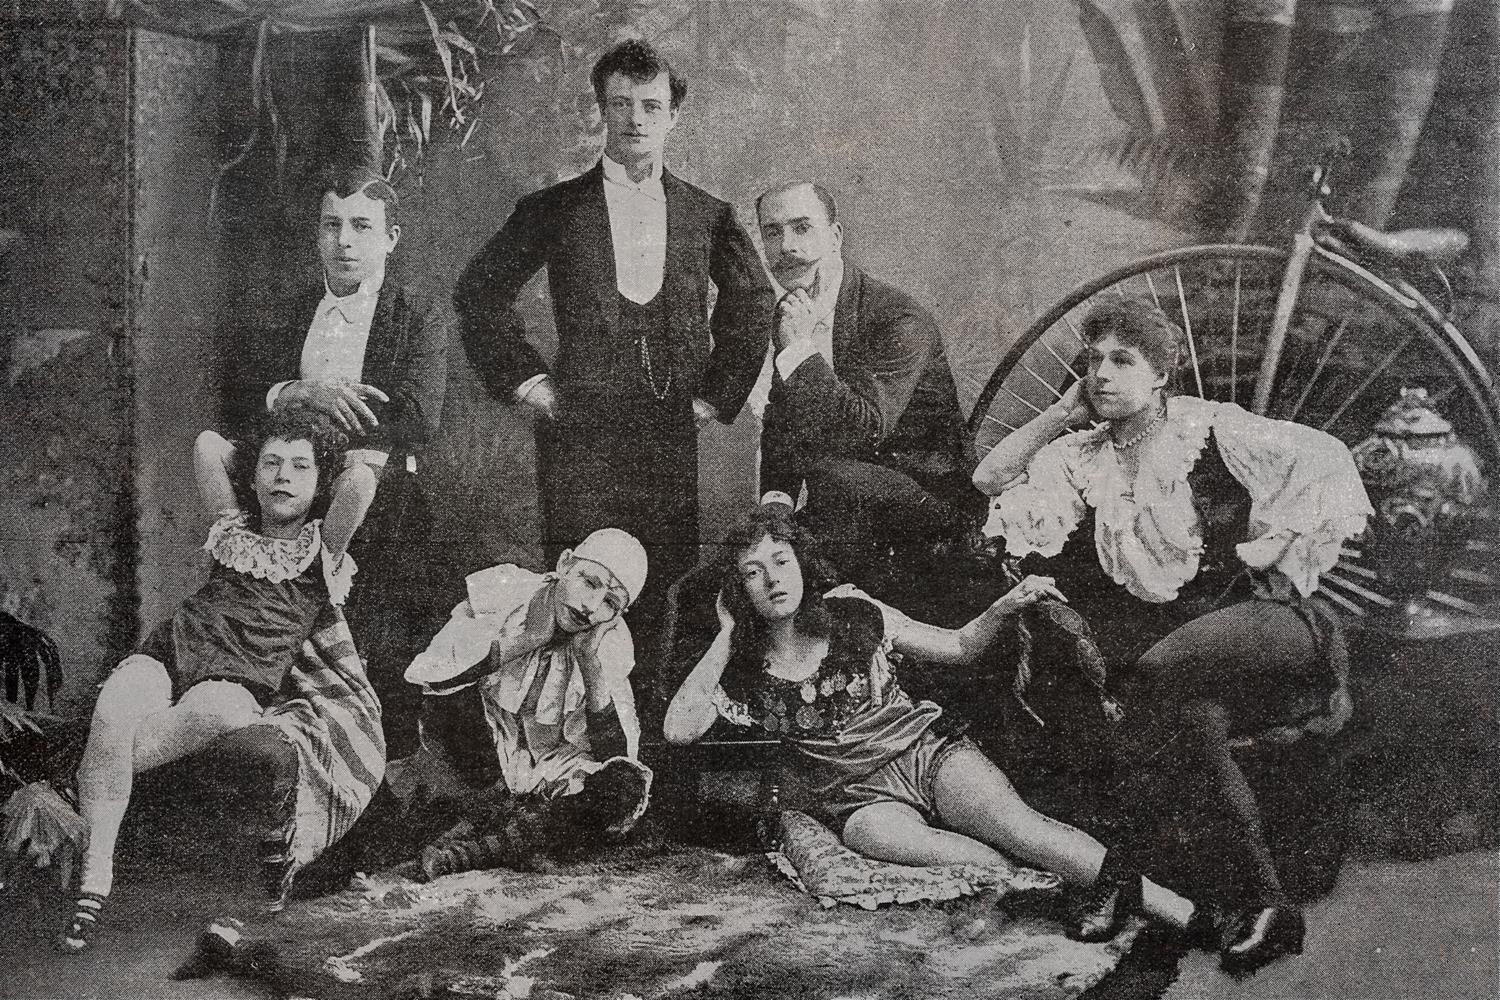 Victorian circus performers